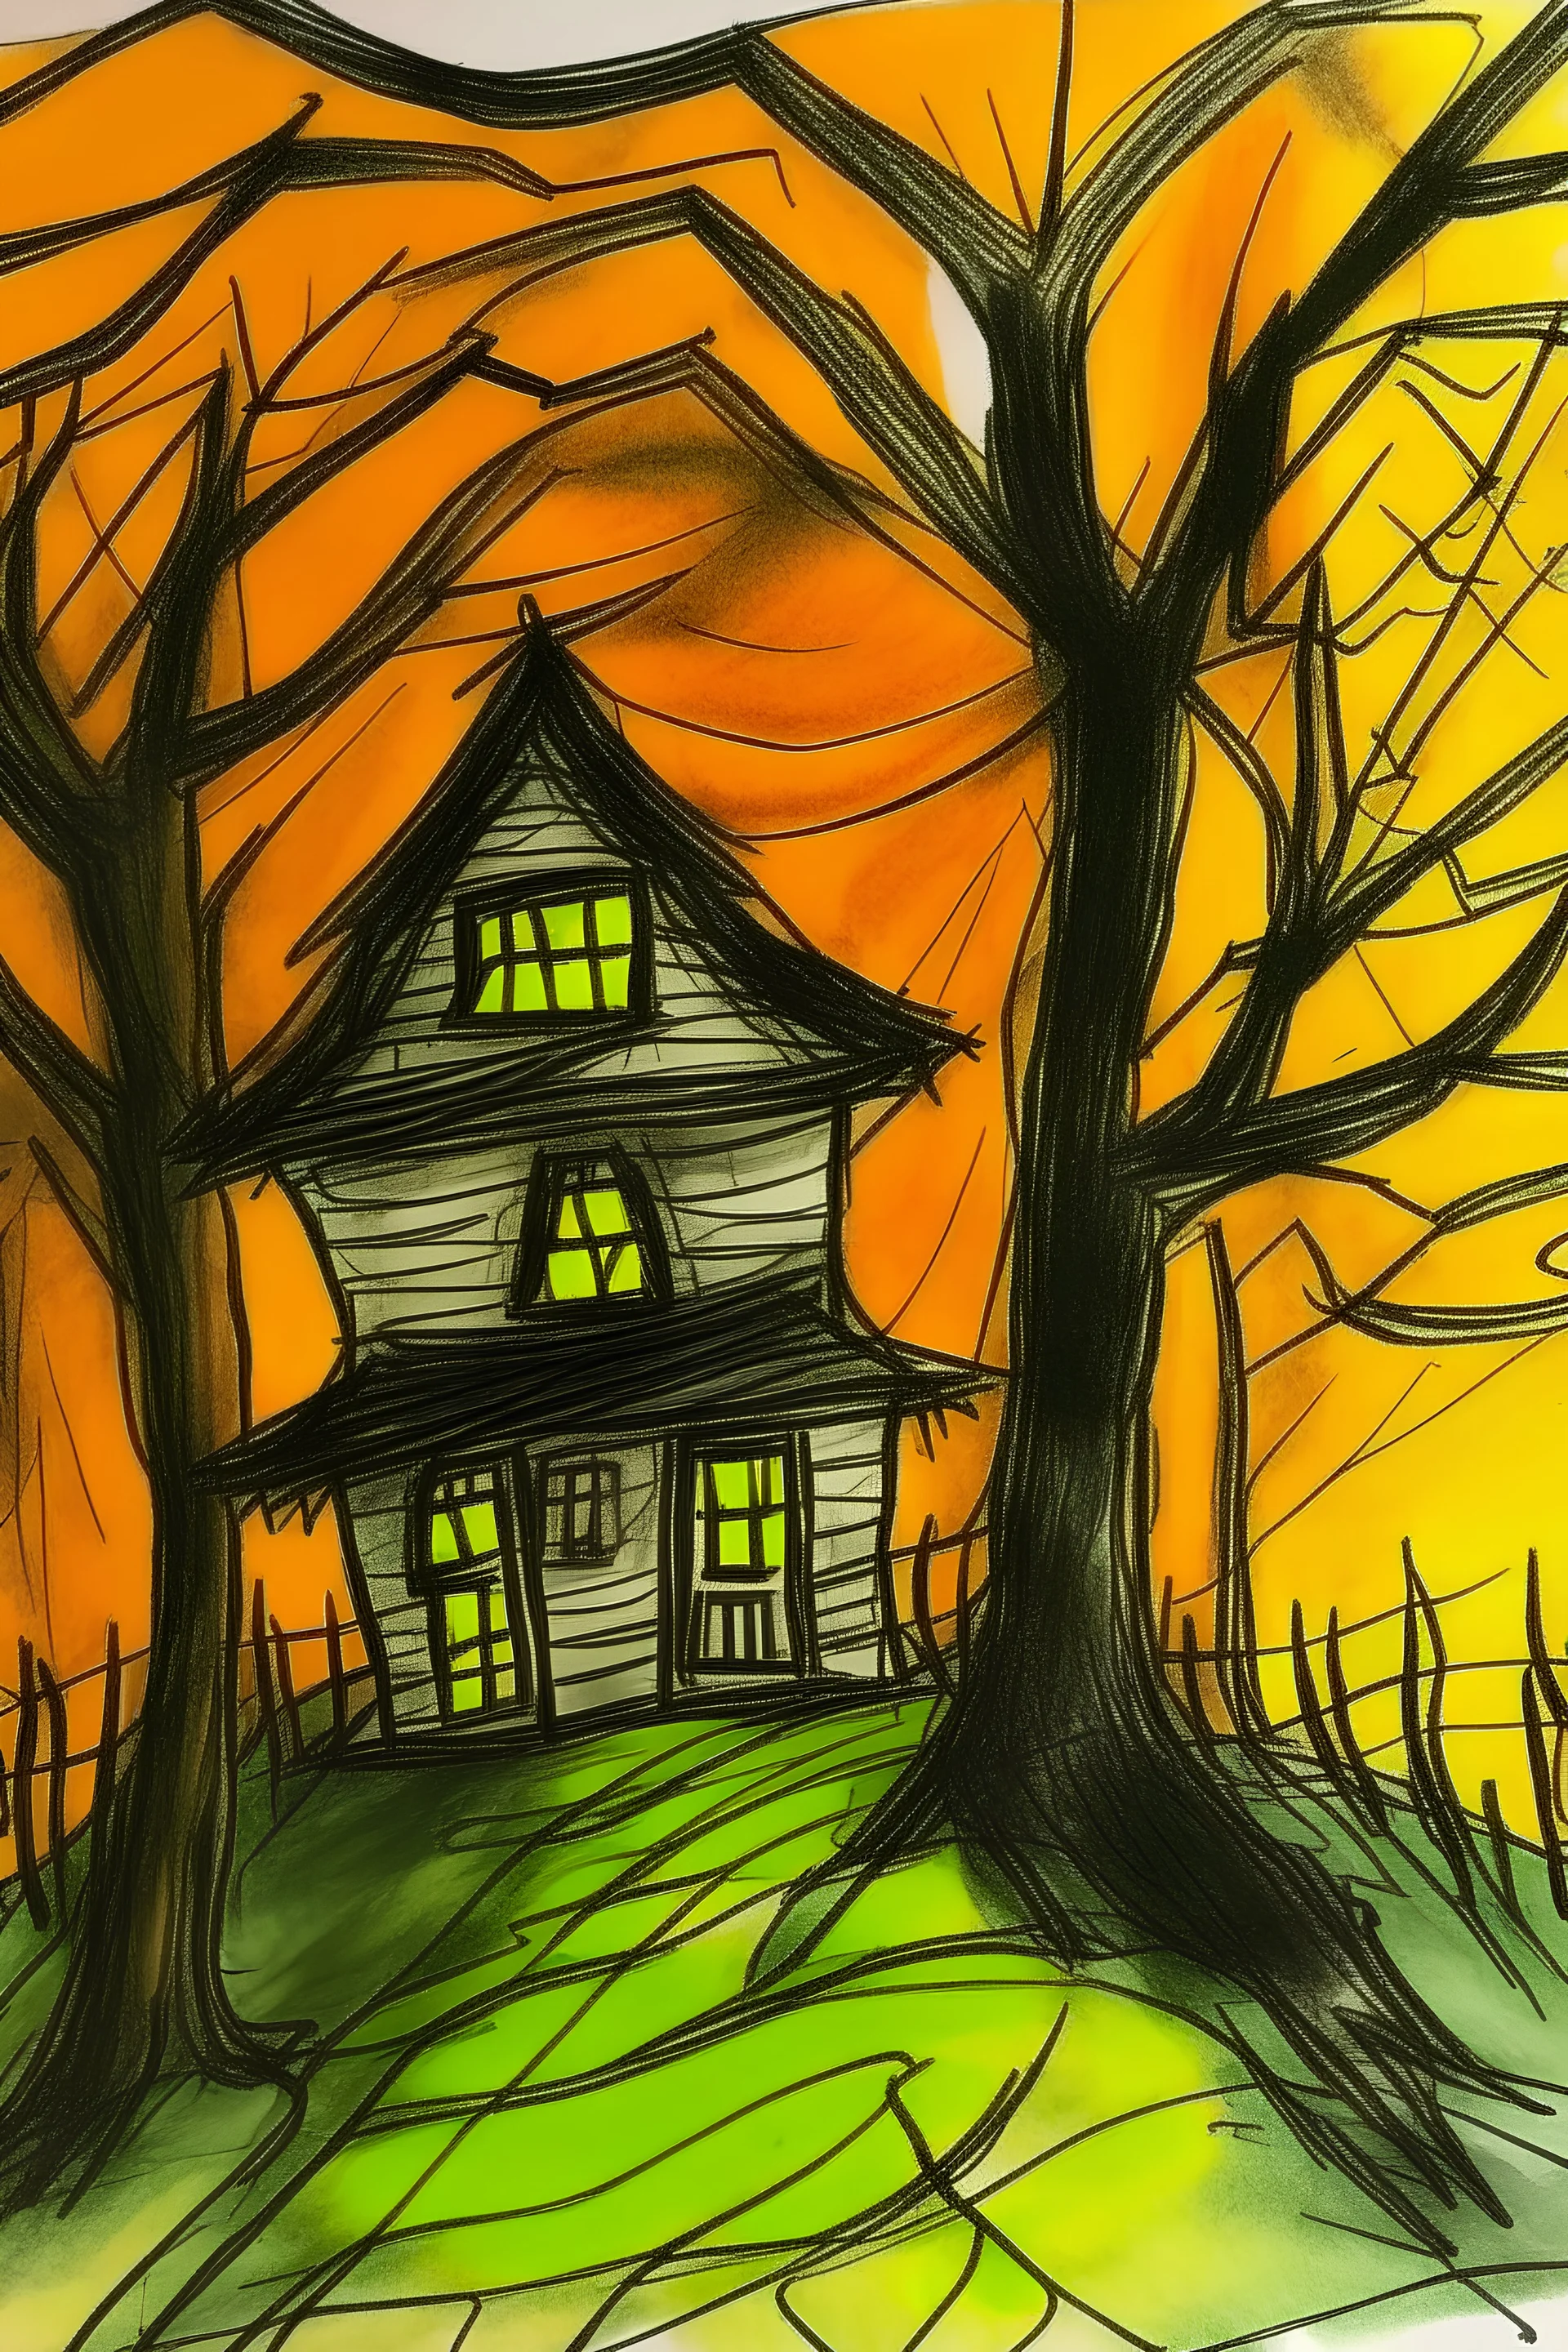 creepy house drawing by a child